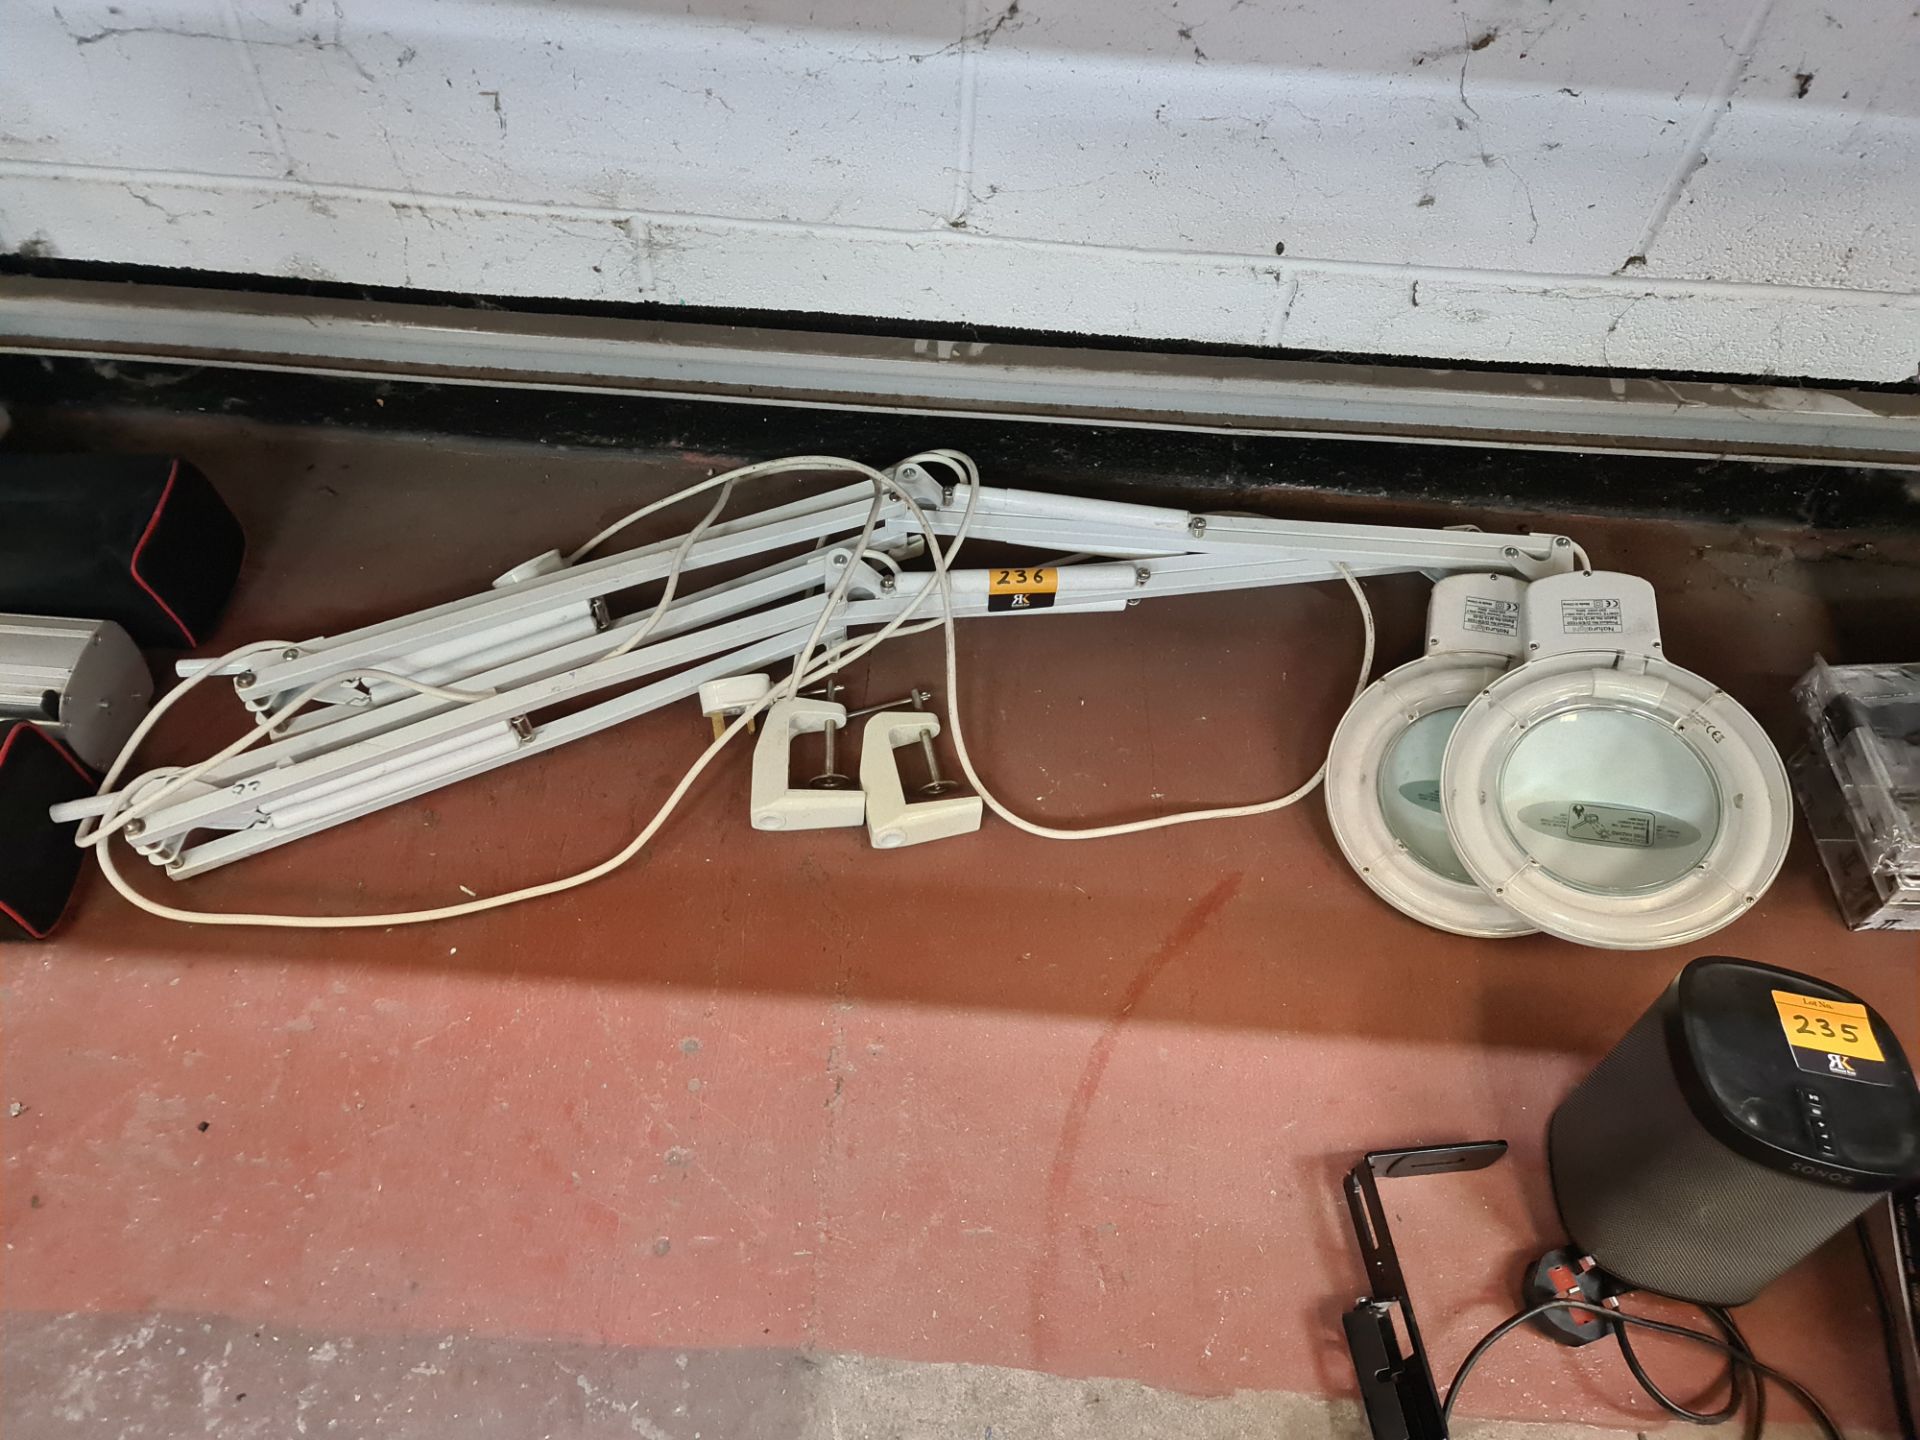 2 off adjustable lamps each including a mounting bracket